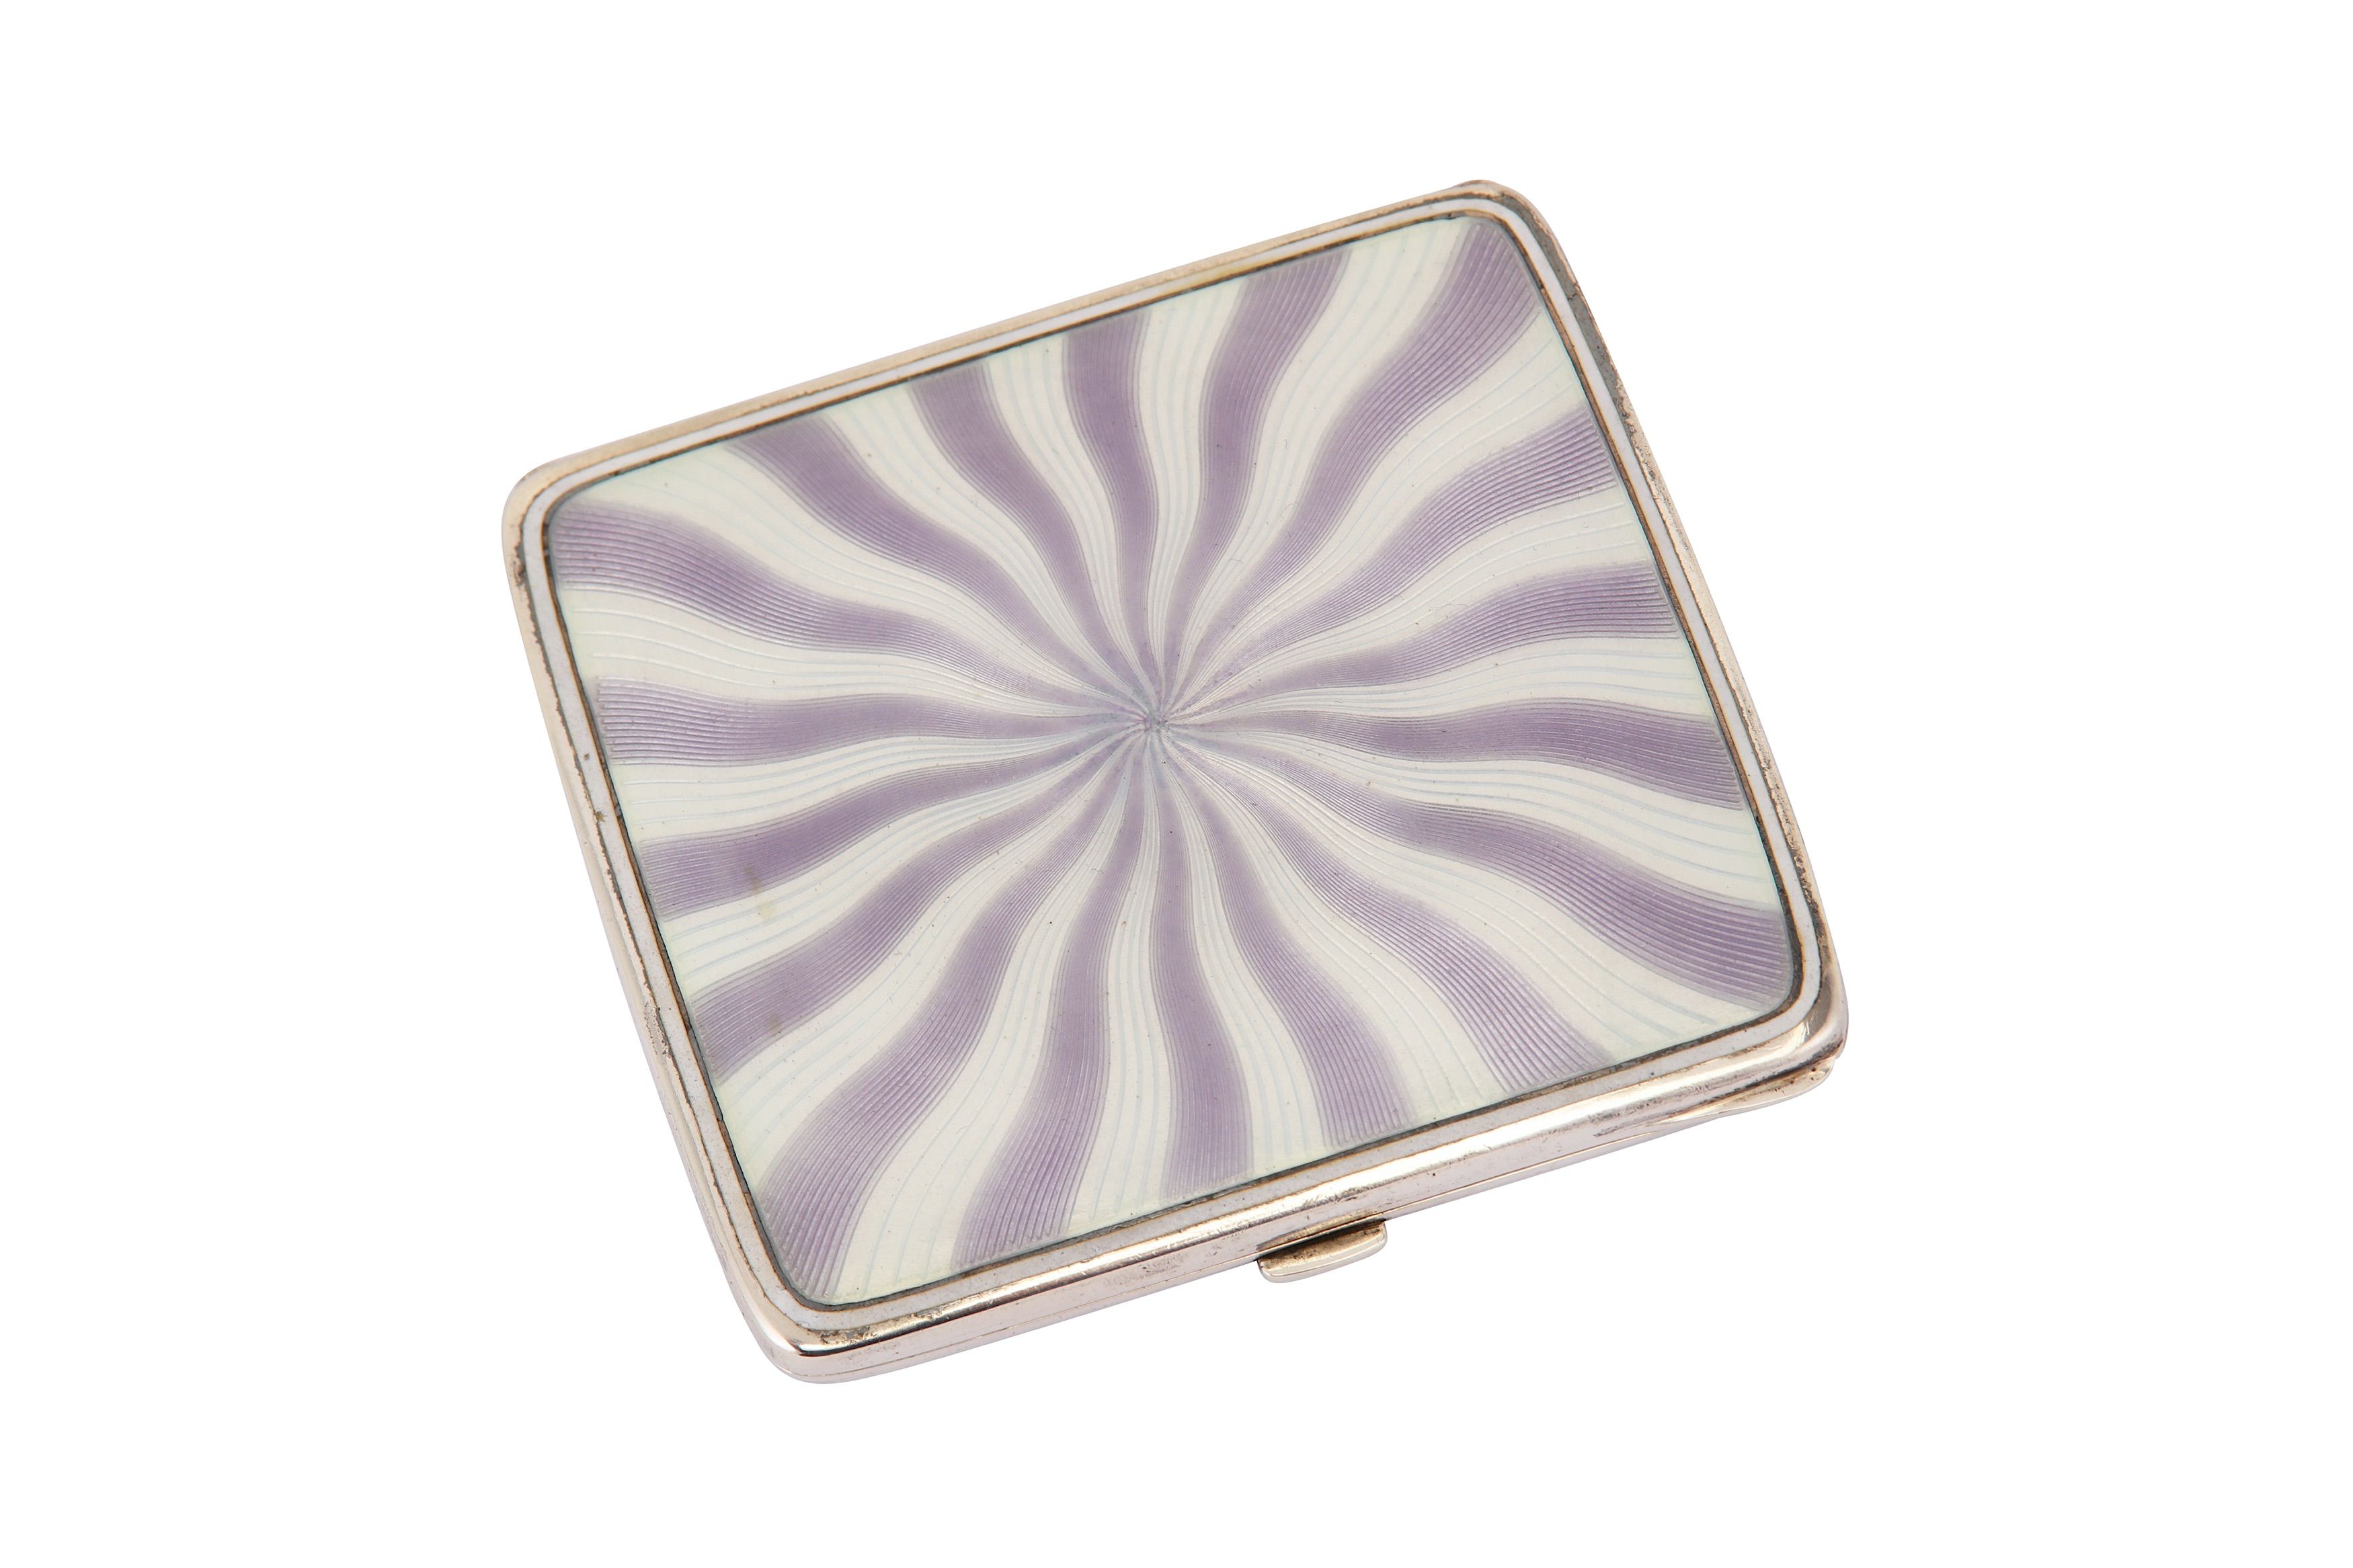 An early 20th century German 900 standard silver and guilloche enamel cigarette case, probably